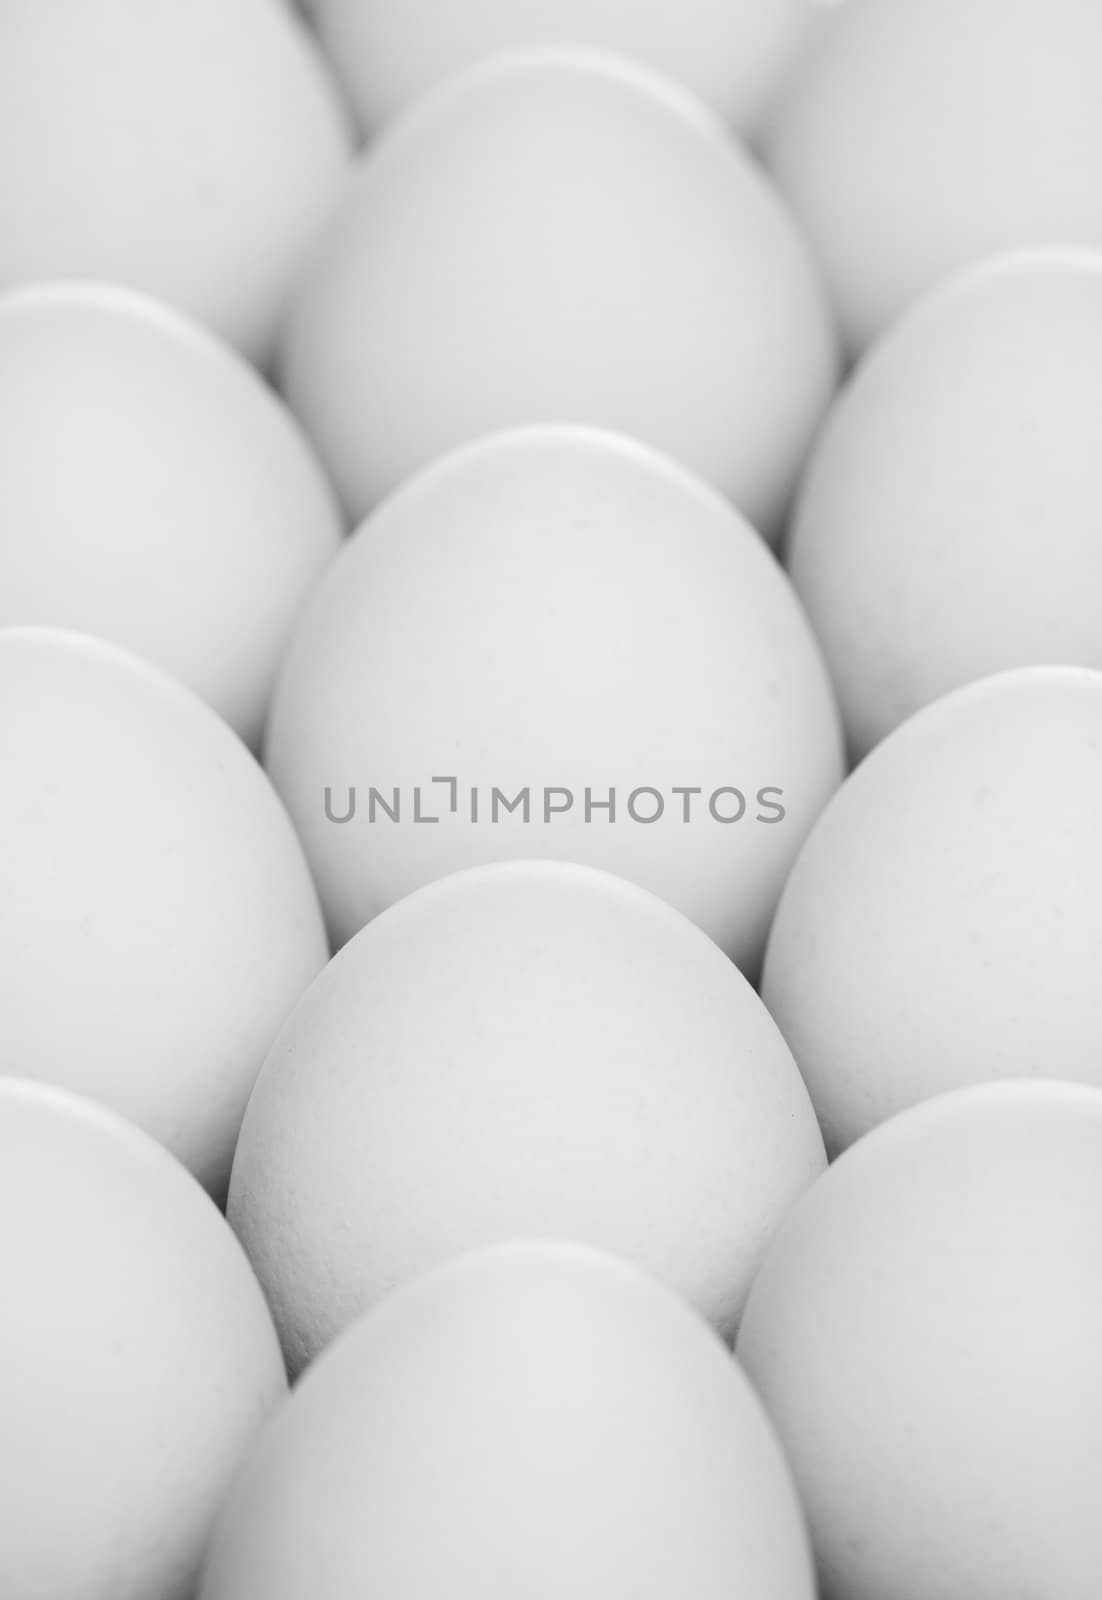 the pack of white eggs